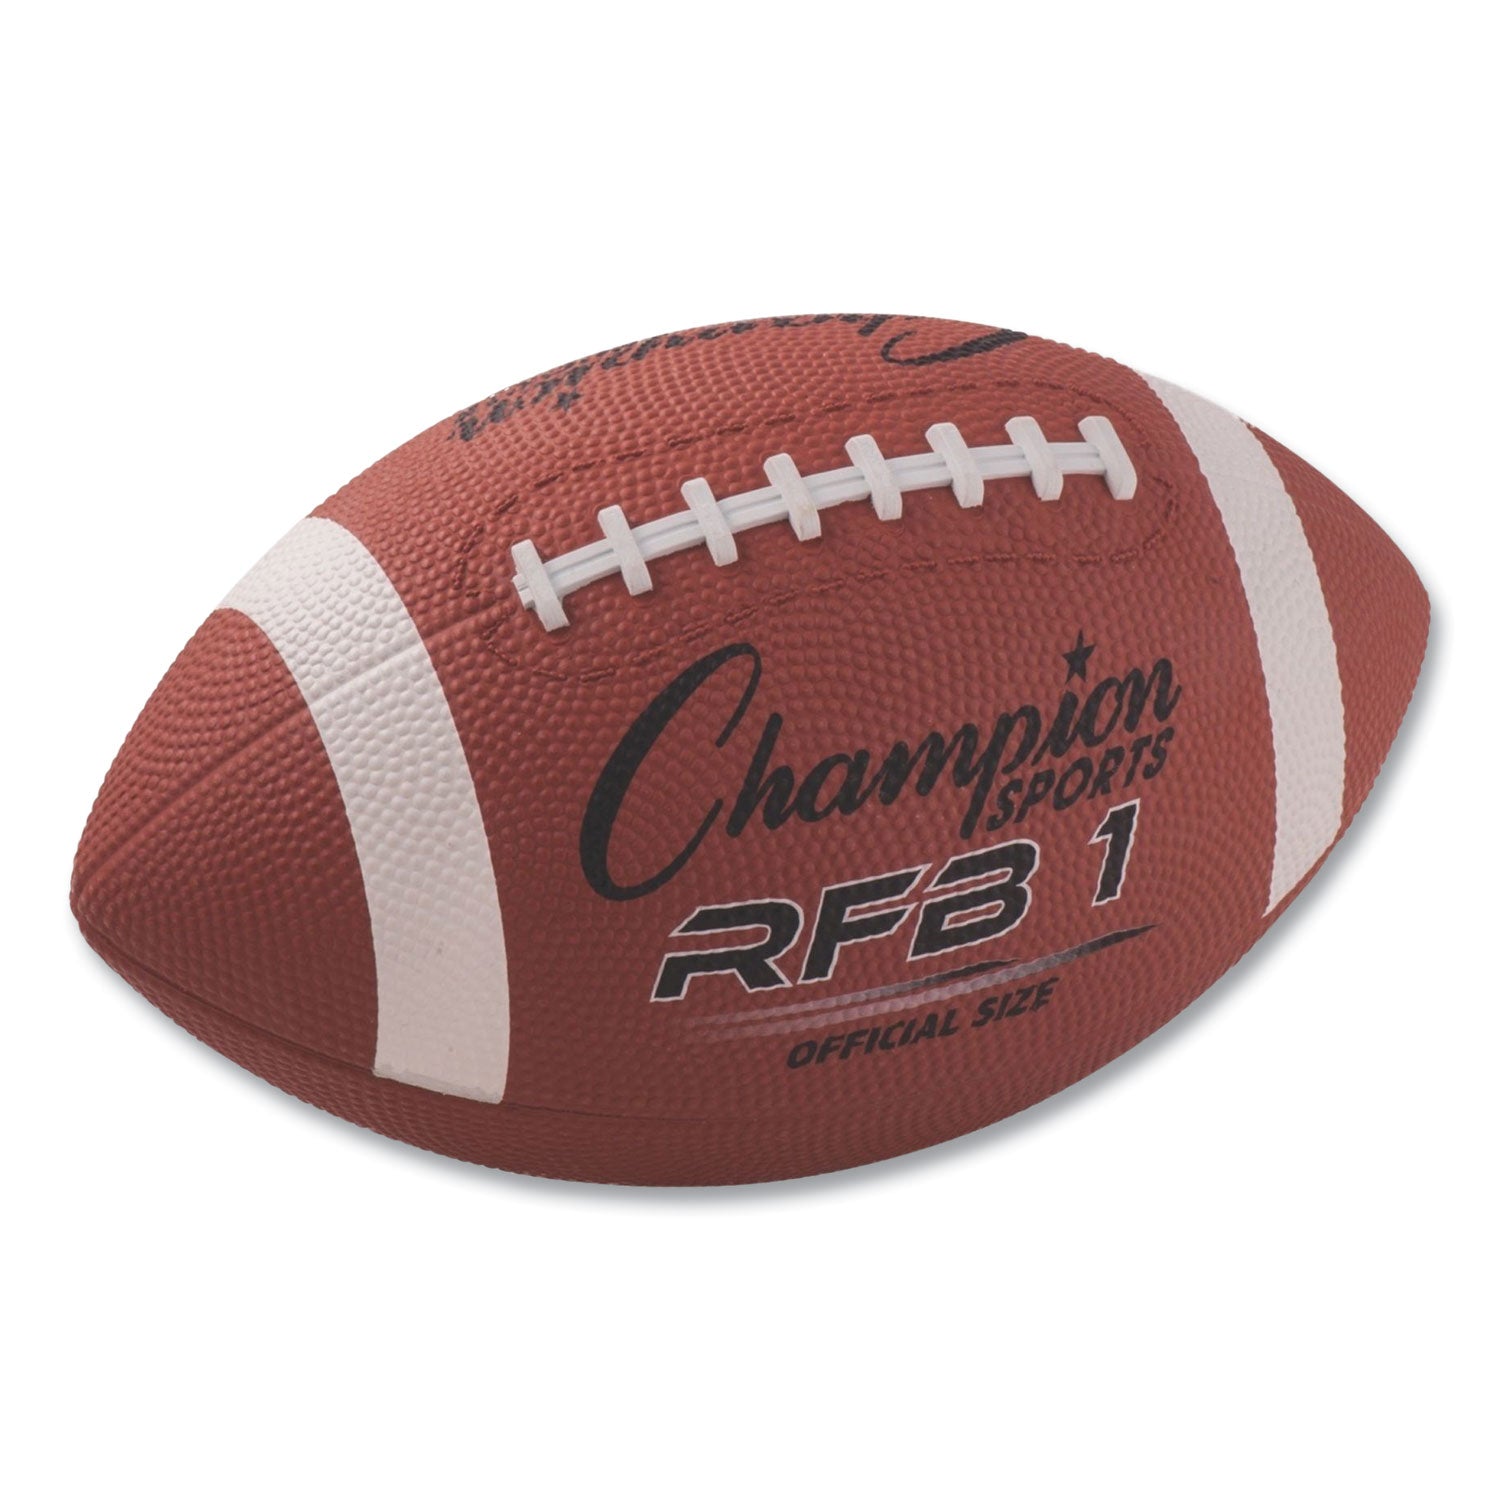 rubber-sports-ball-football-official-nfl-no-9-size-brown_csirfb1 - 1